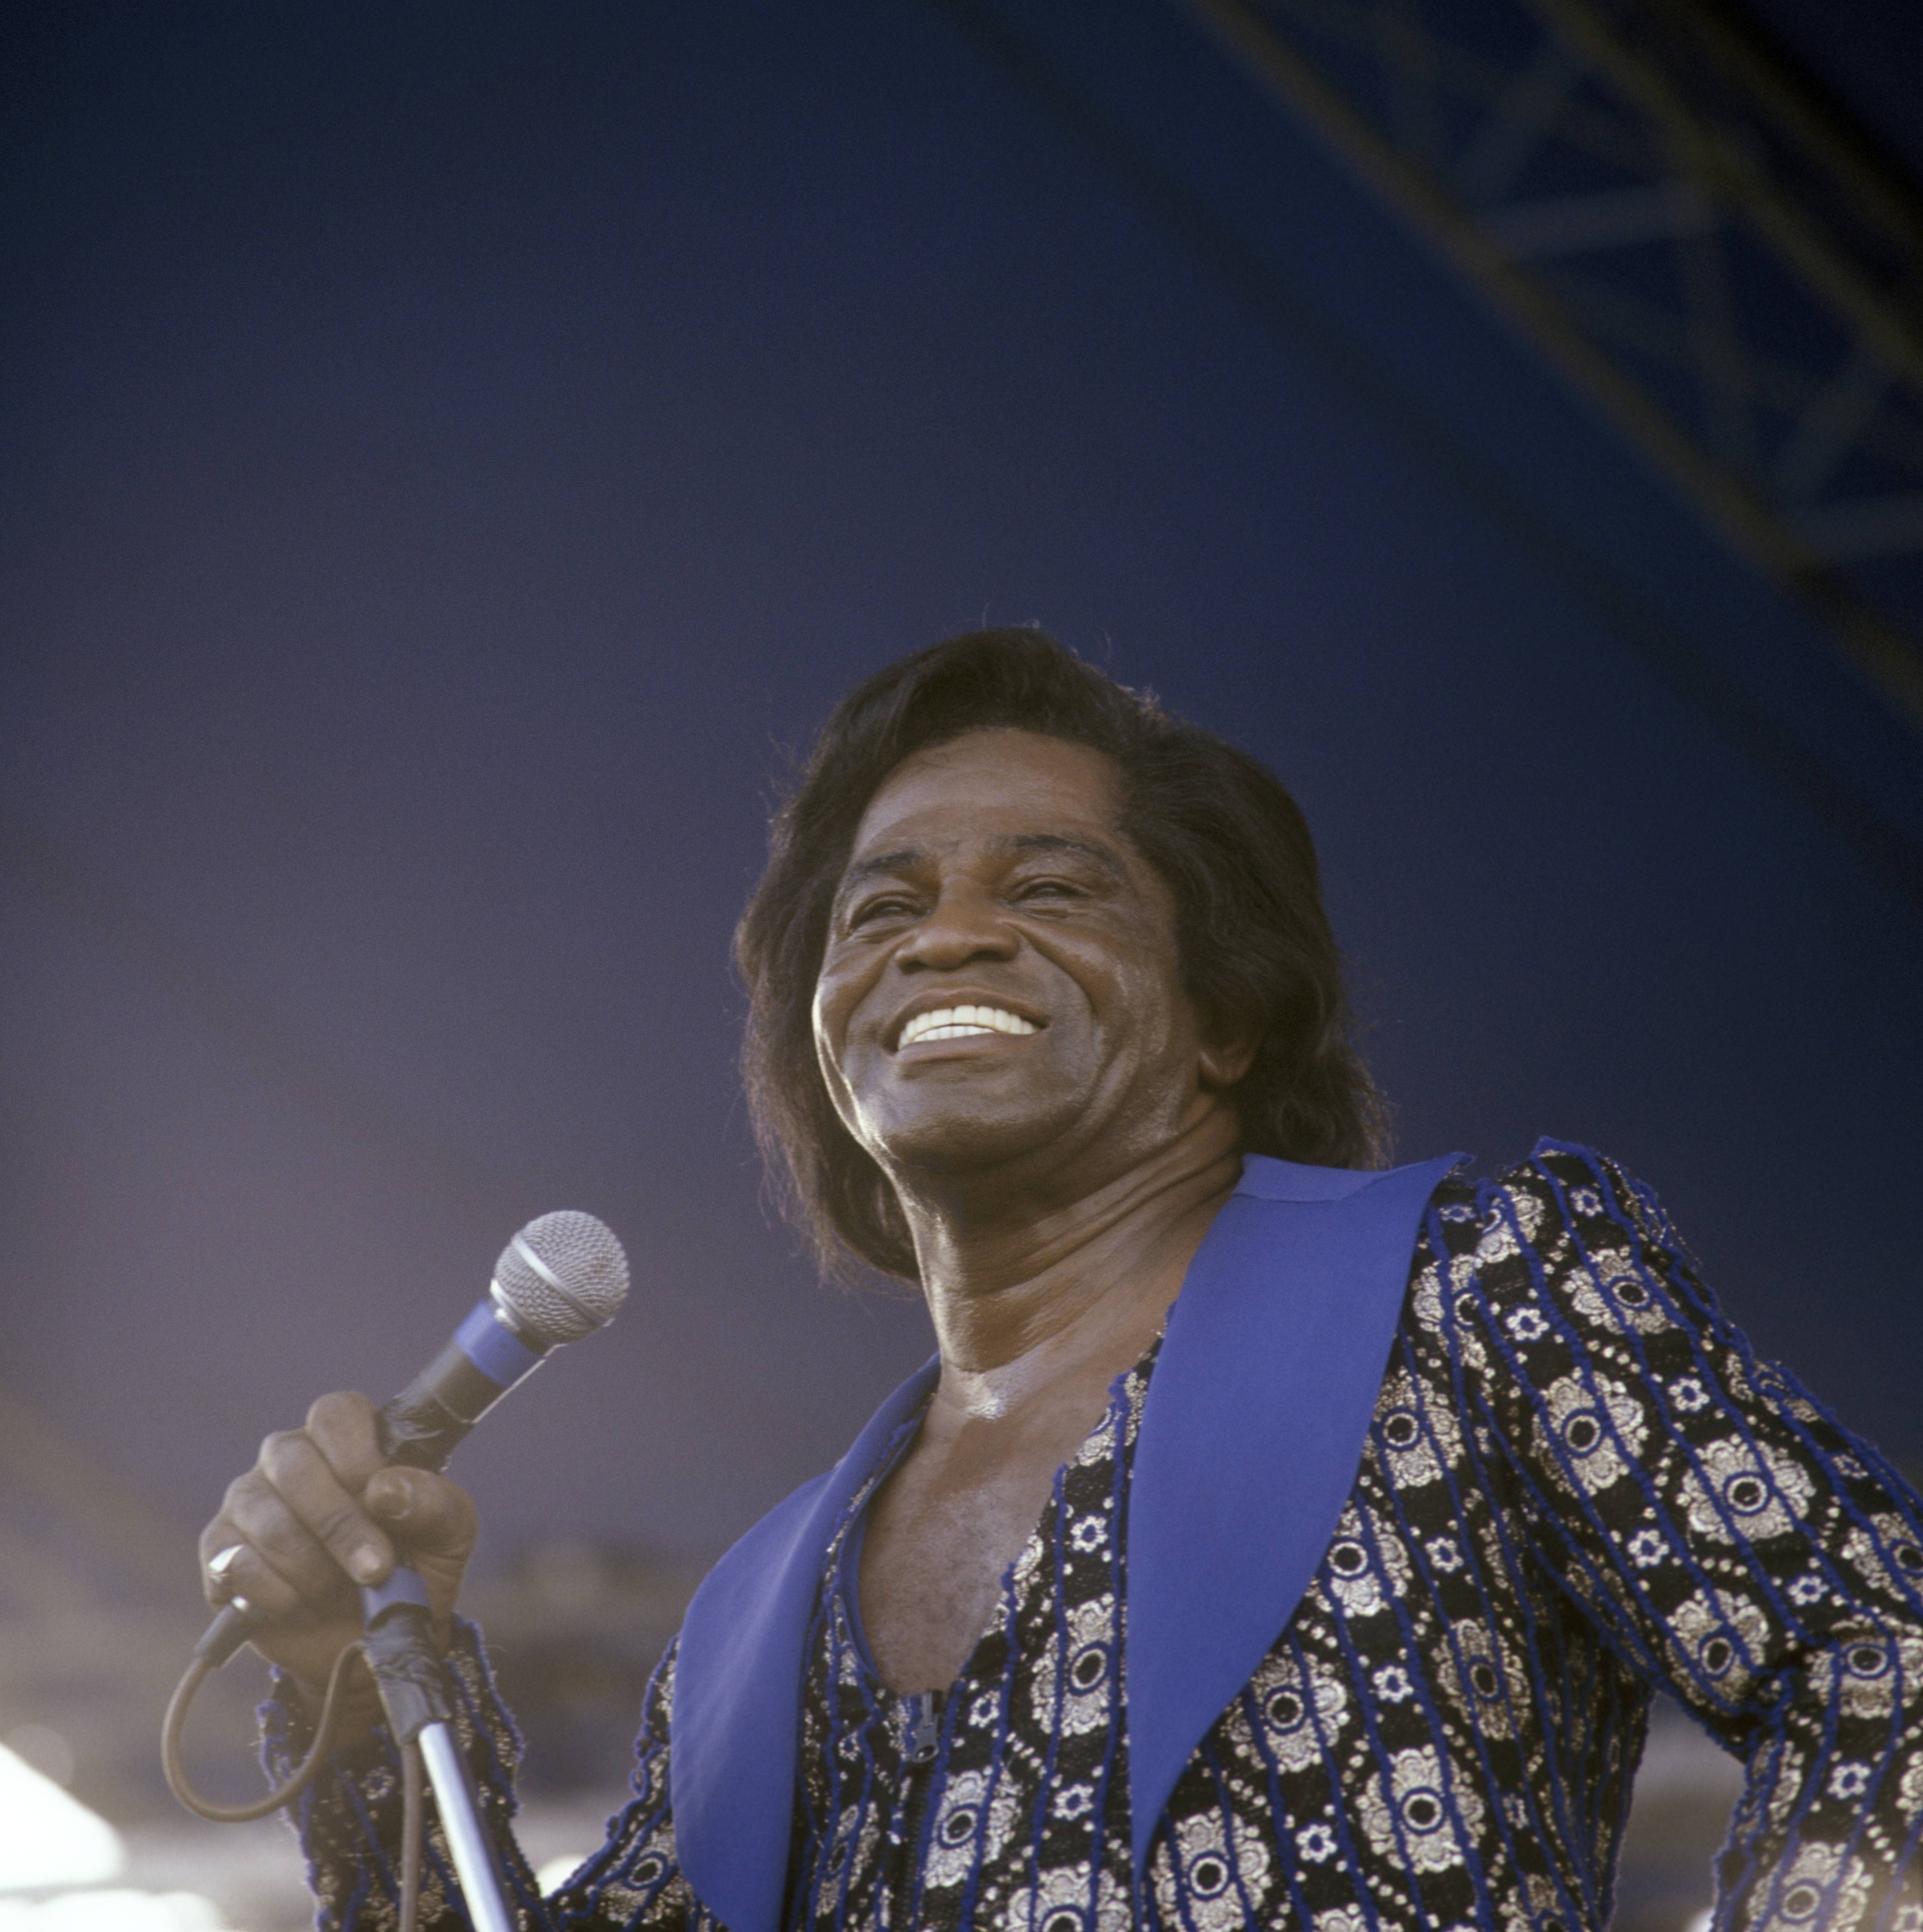 James Brown performs live on stage at the New Orleans Jazz & Heritage Festival in New Orleans, Louisiana, United States on April 23, 1988 | Source: Getty Images